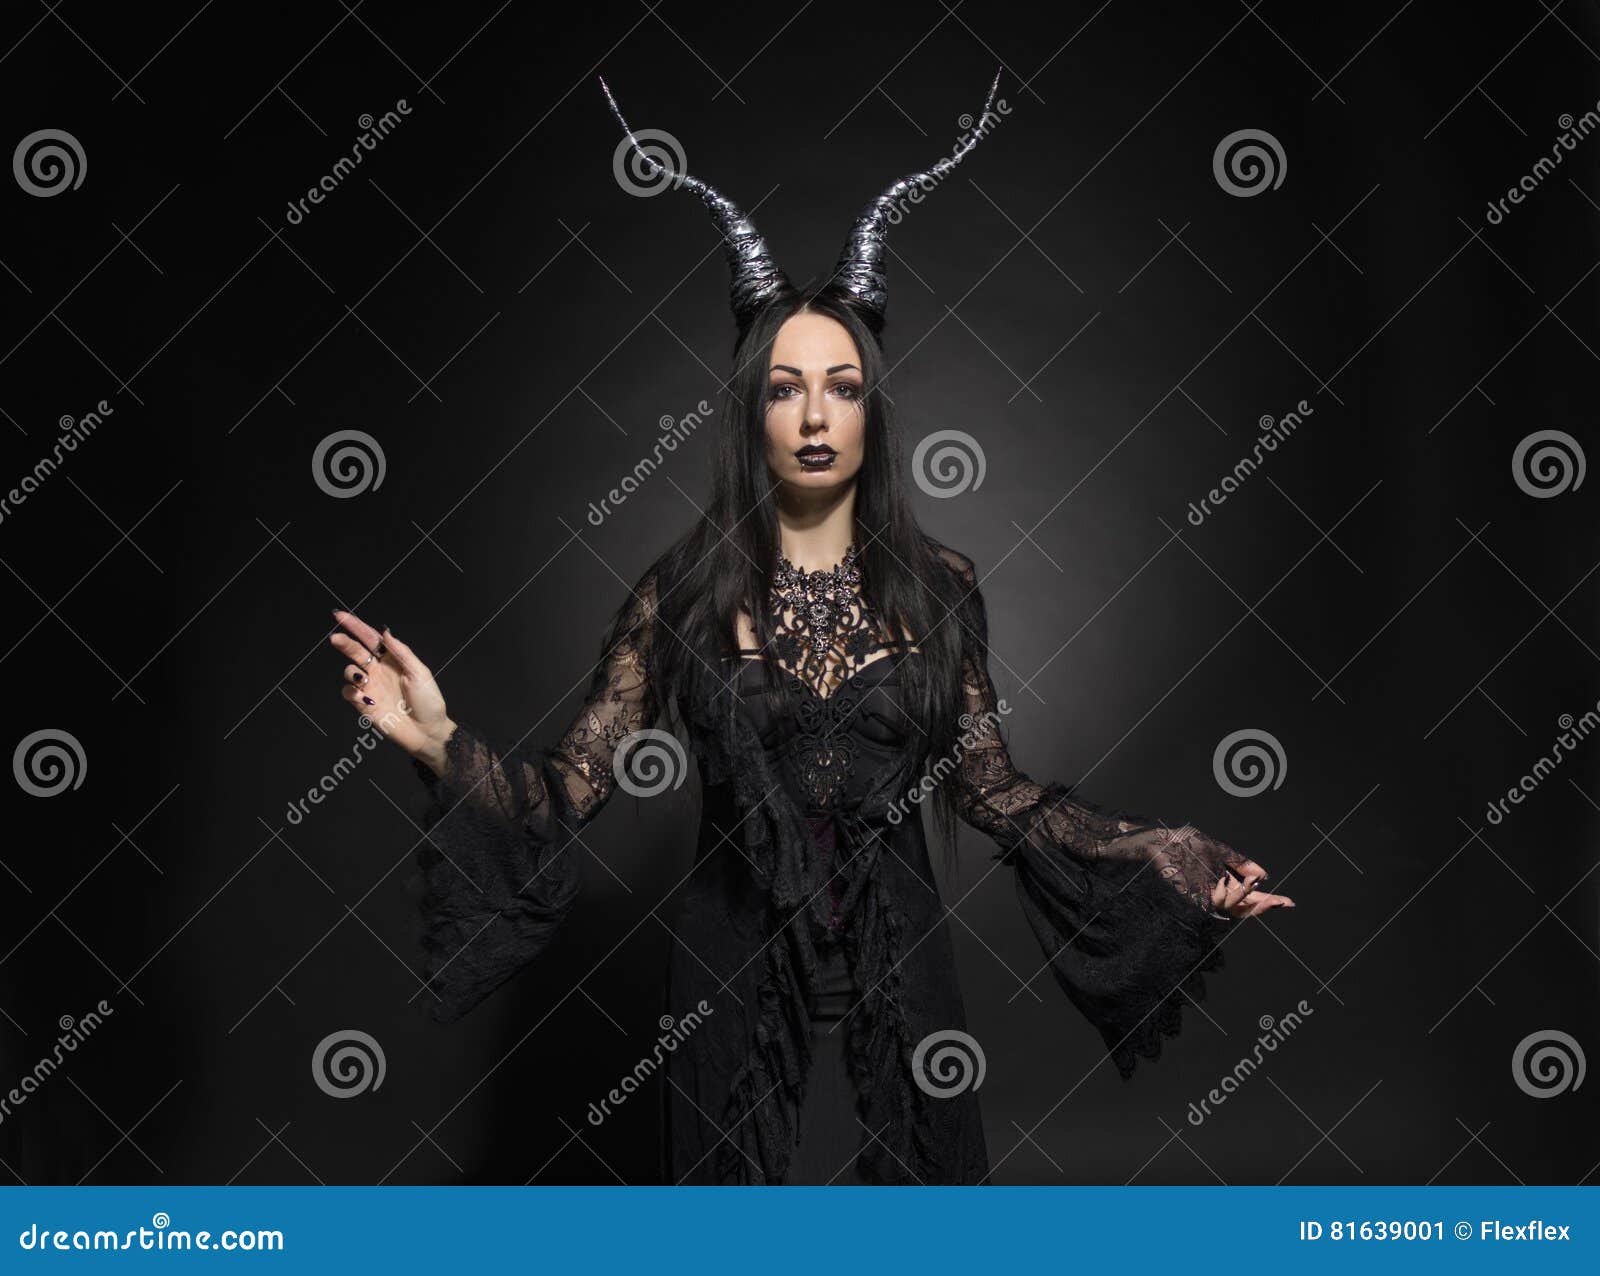 young woman in black fantasy costume